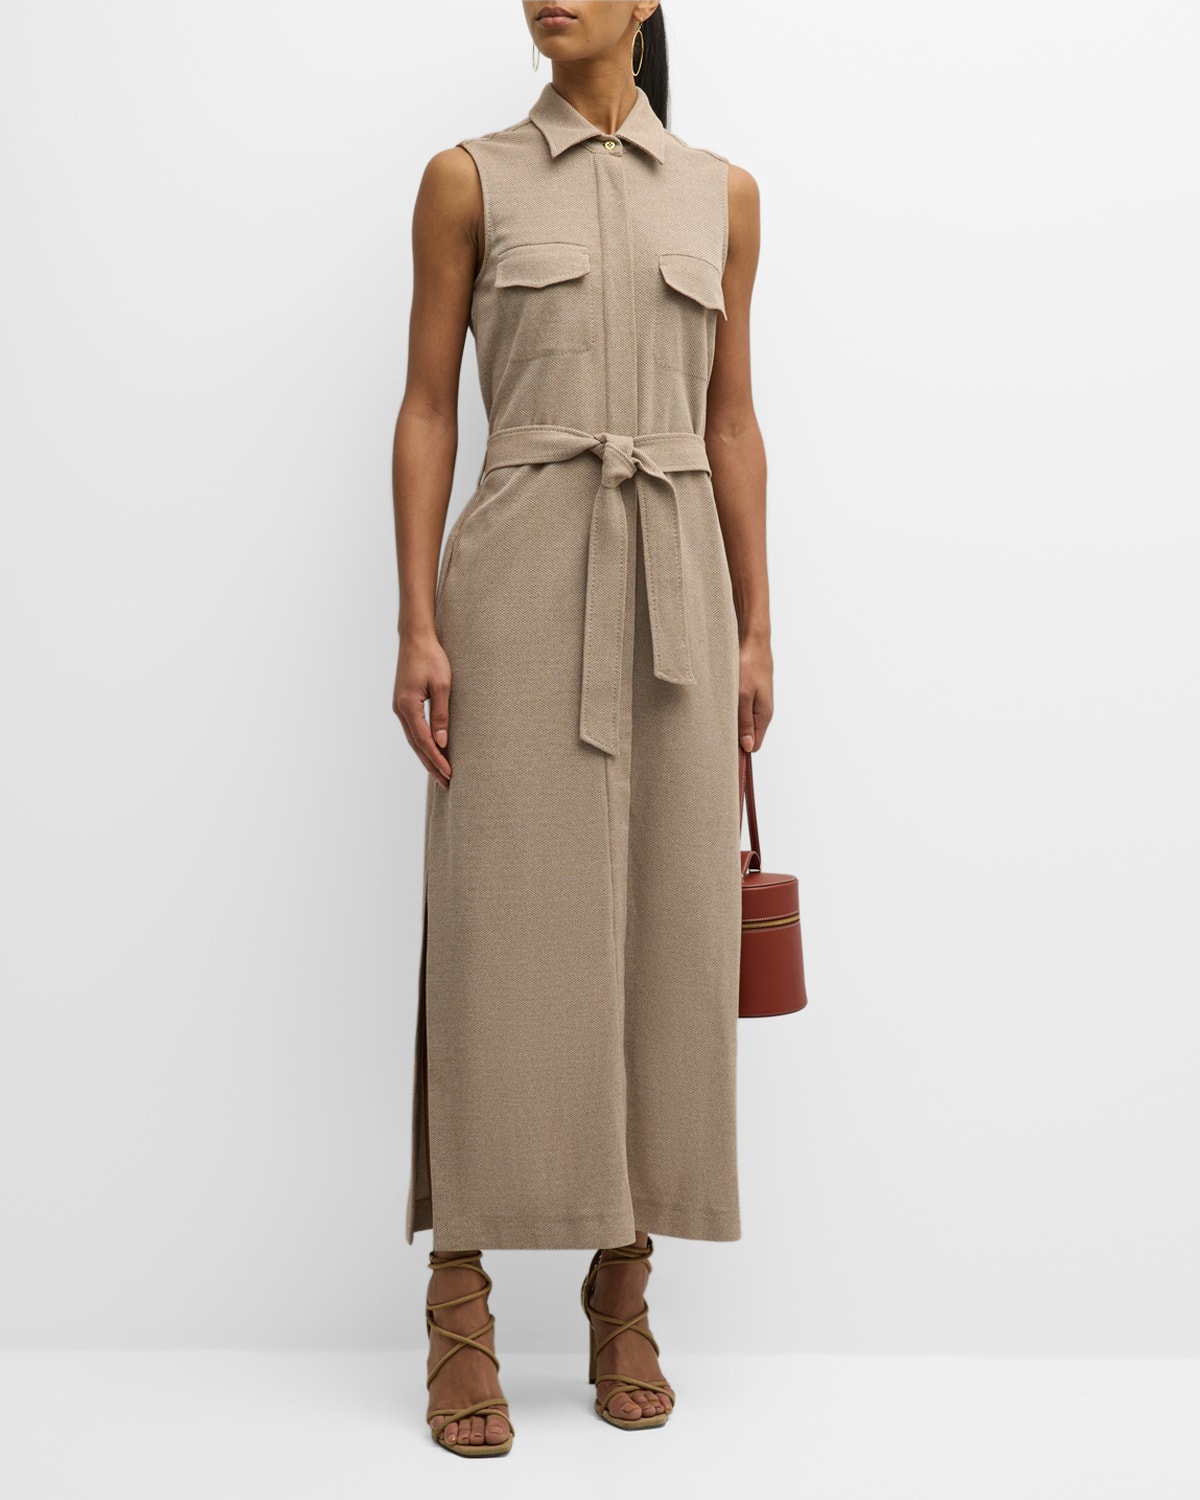 Lampo Sleeveless Belted Pique Knit Maxi Shirtdress